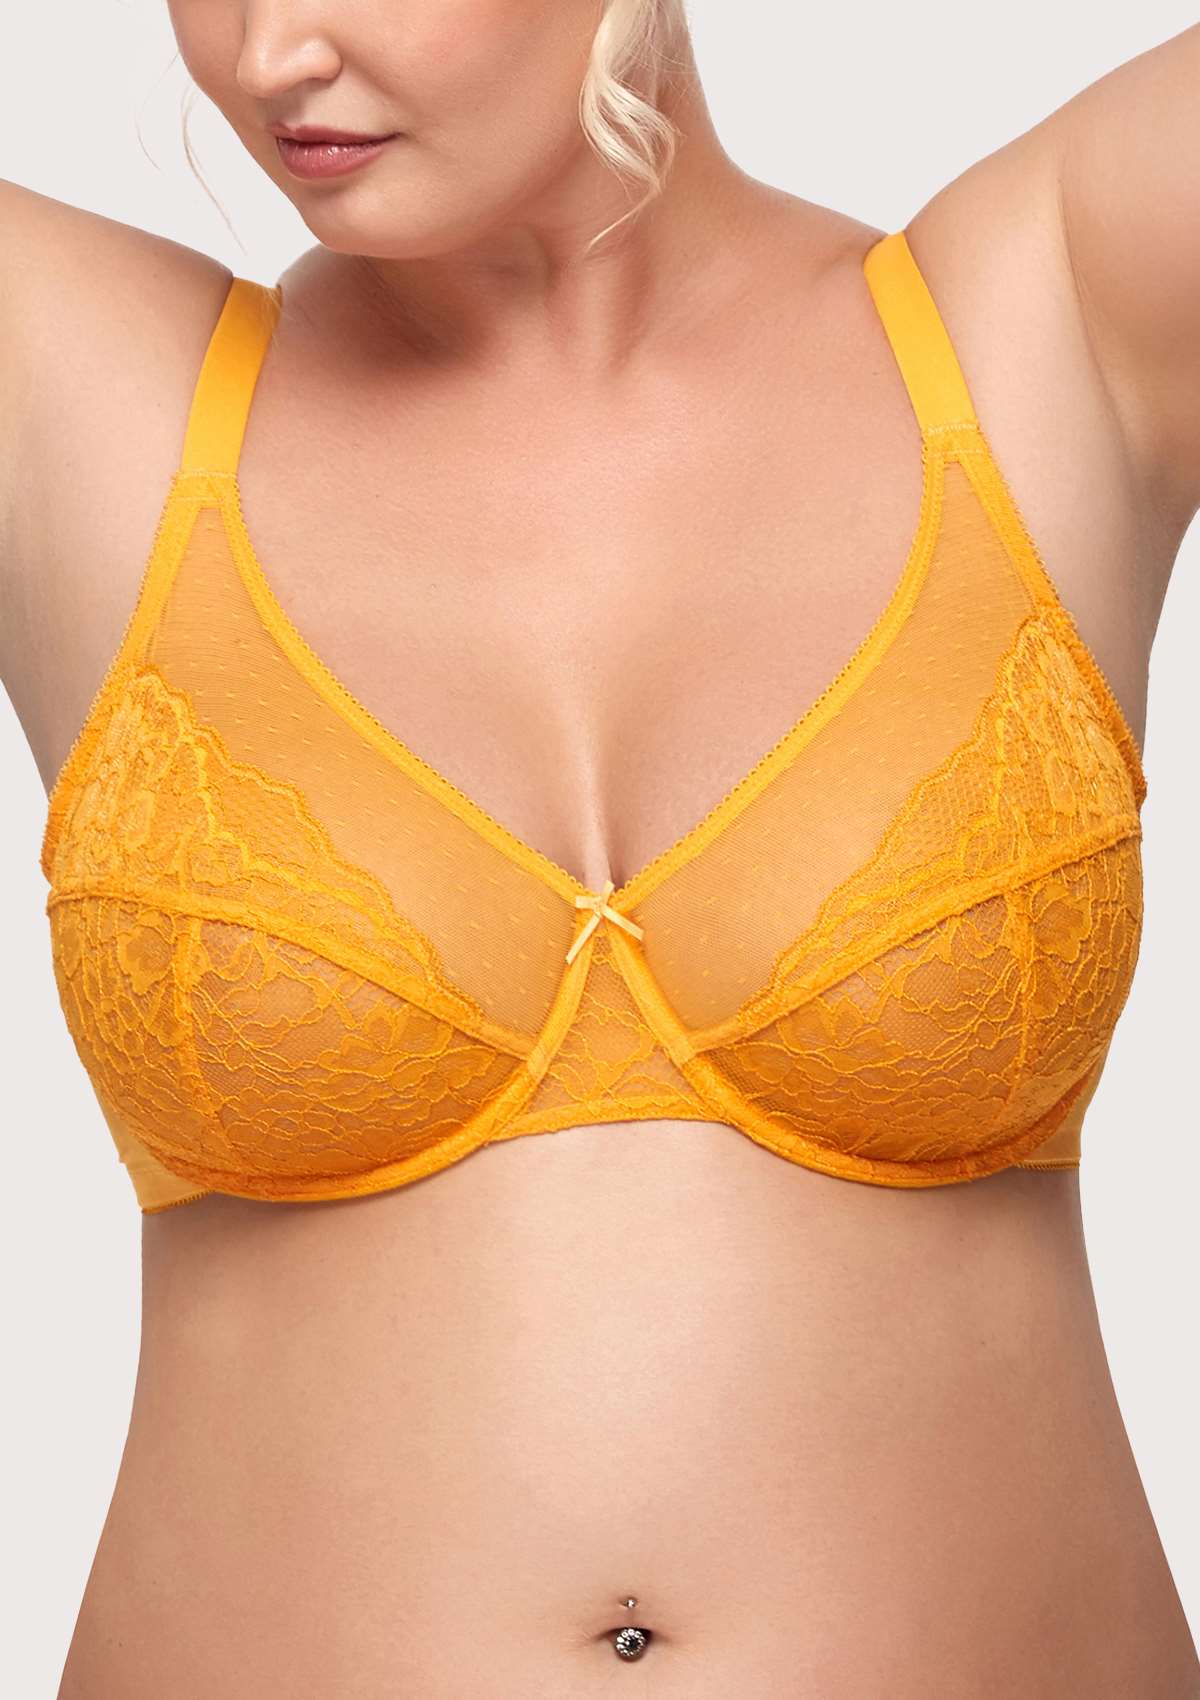 HSIA Enchante Bra And Panty Sets: Unpadded Bra With Back Support - Cadmium Yellow / 46 / C